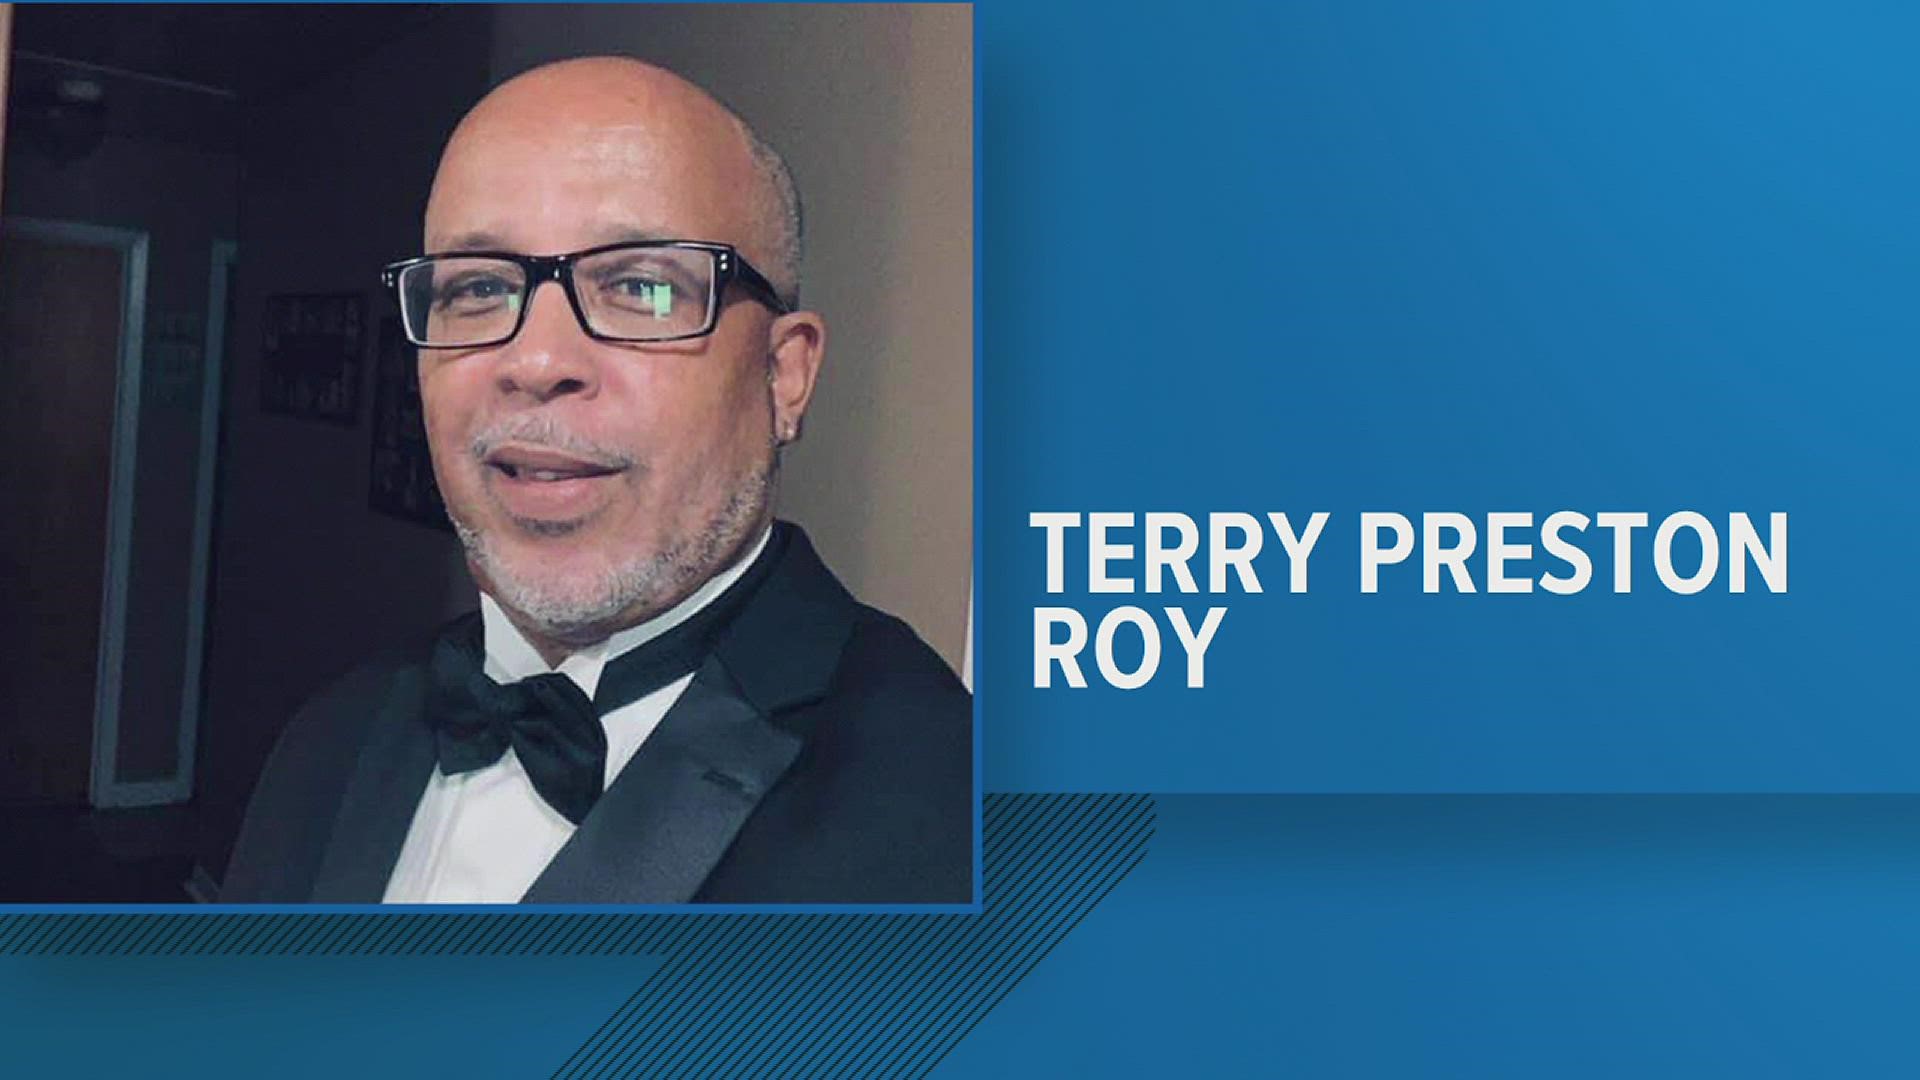 The Beaumont Council At-Large seat is the first time Terry Preston Roy, 62, will run for office. He's lived in  Beaumont all his life.